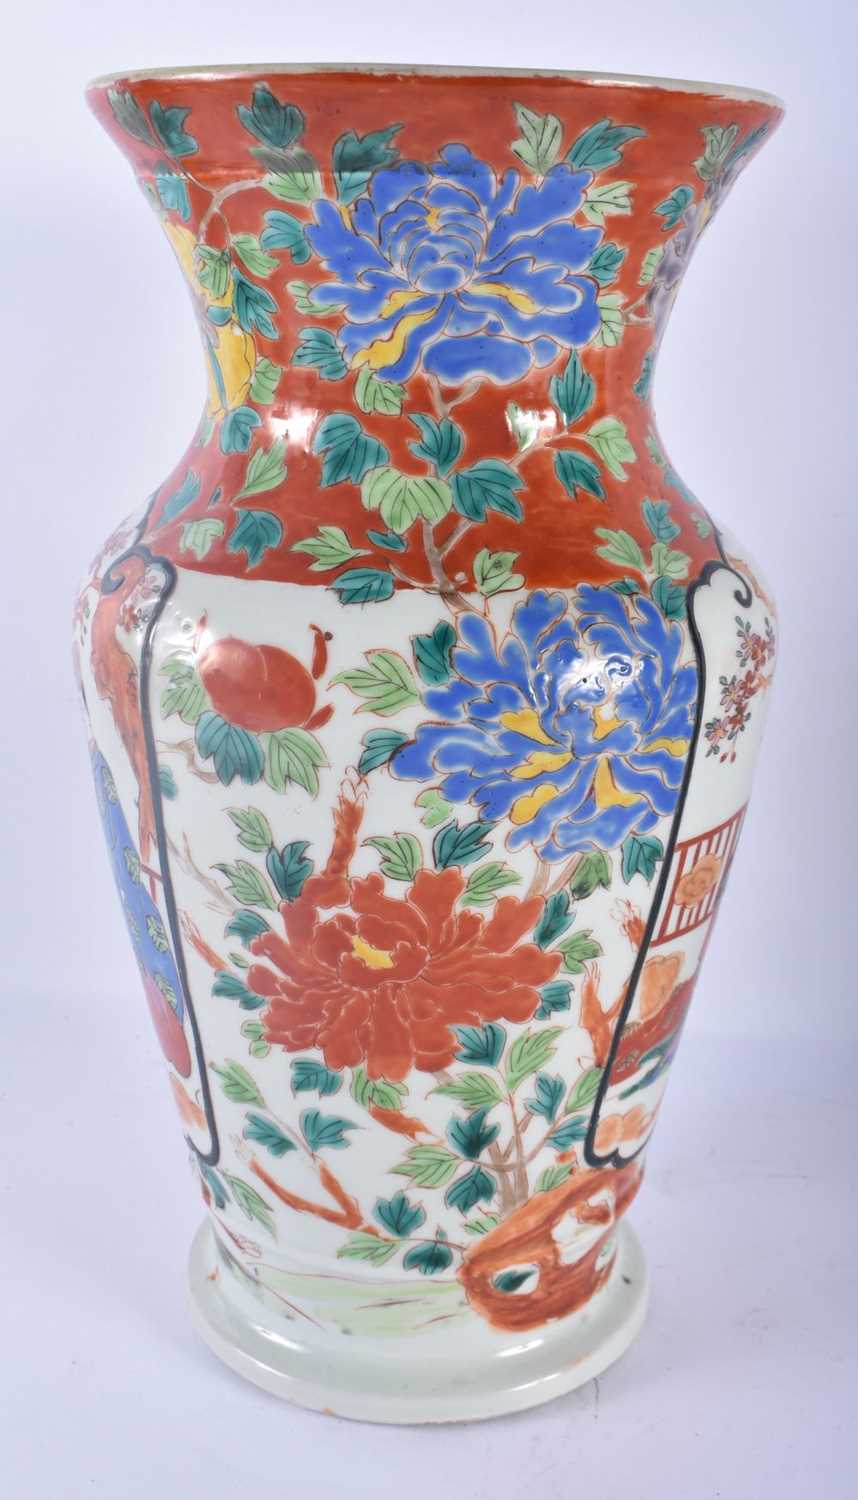 A LARGE 19TH CENTURY JAPANESE MEIJI PERIOD KUTANI PORCELAIN VASE together with a Japanese pottery - Image 2 of 8